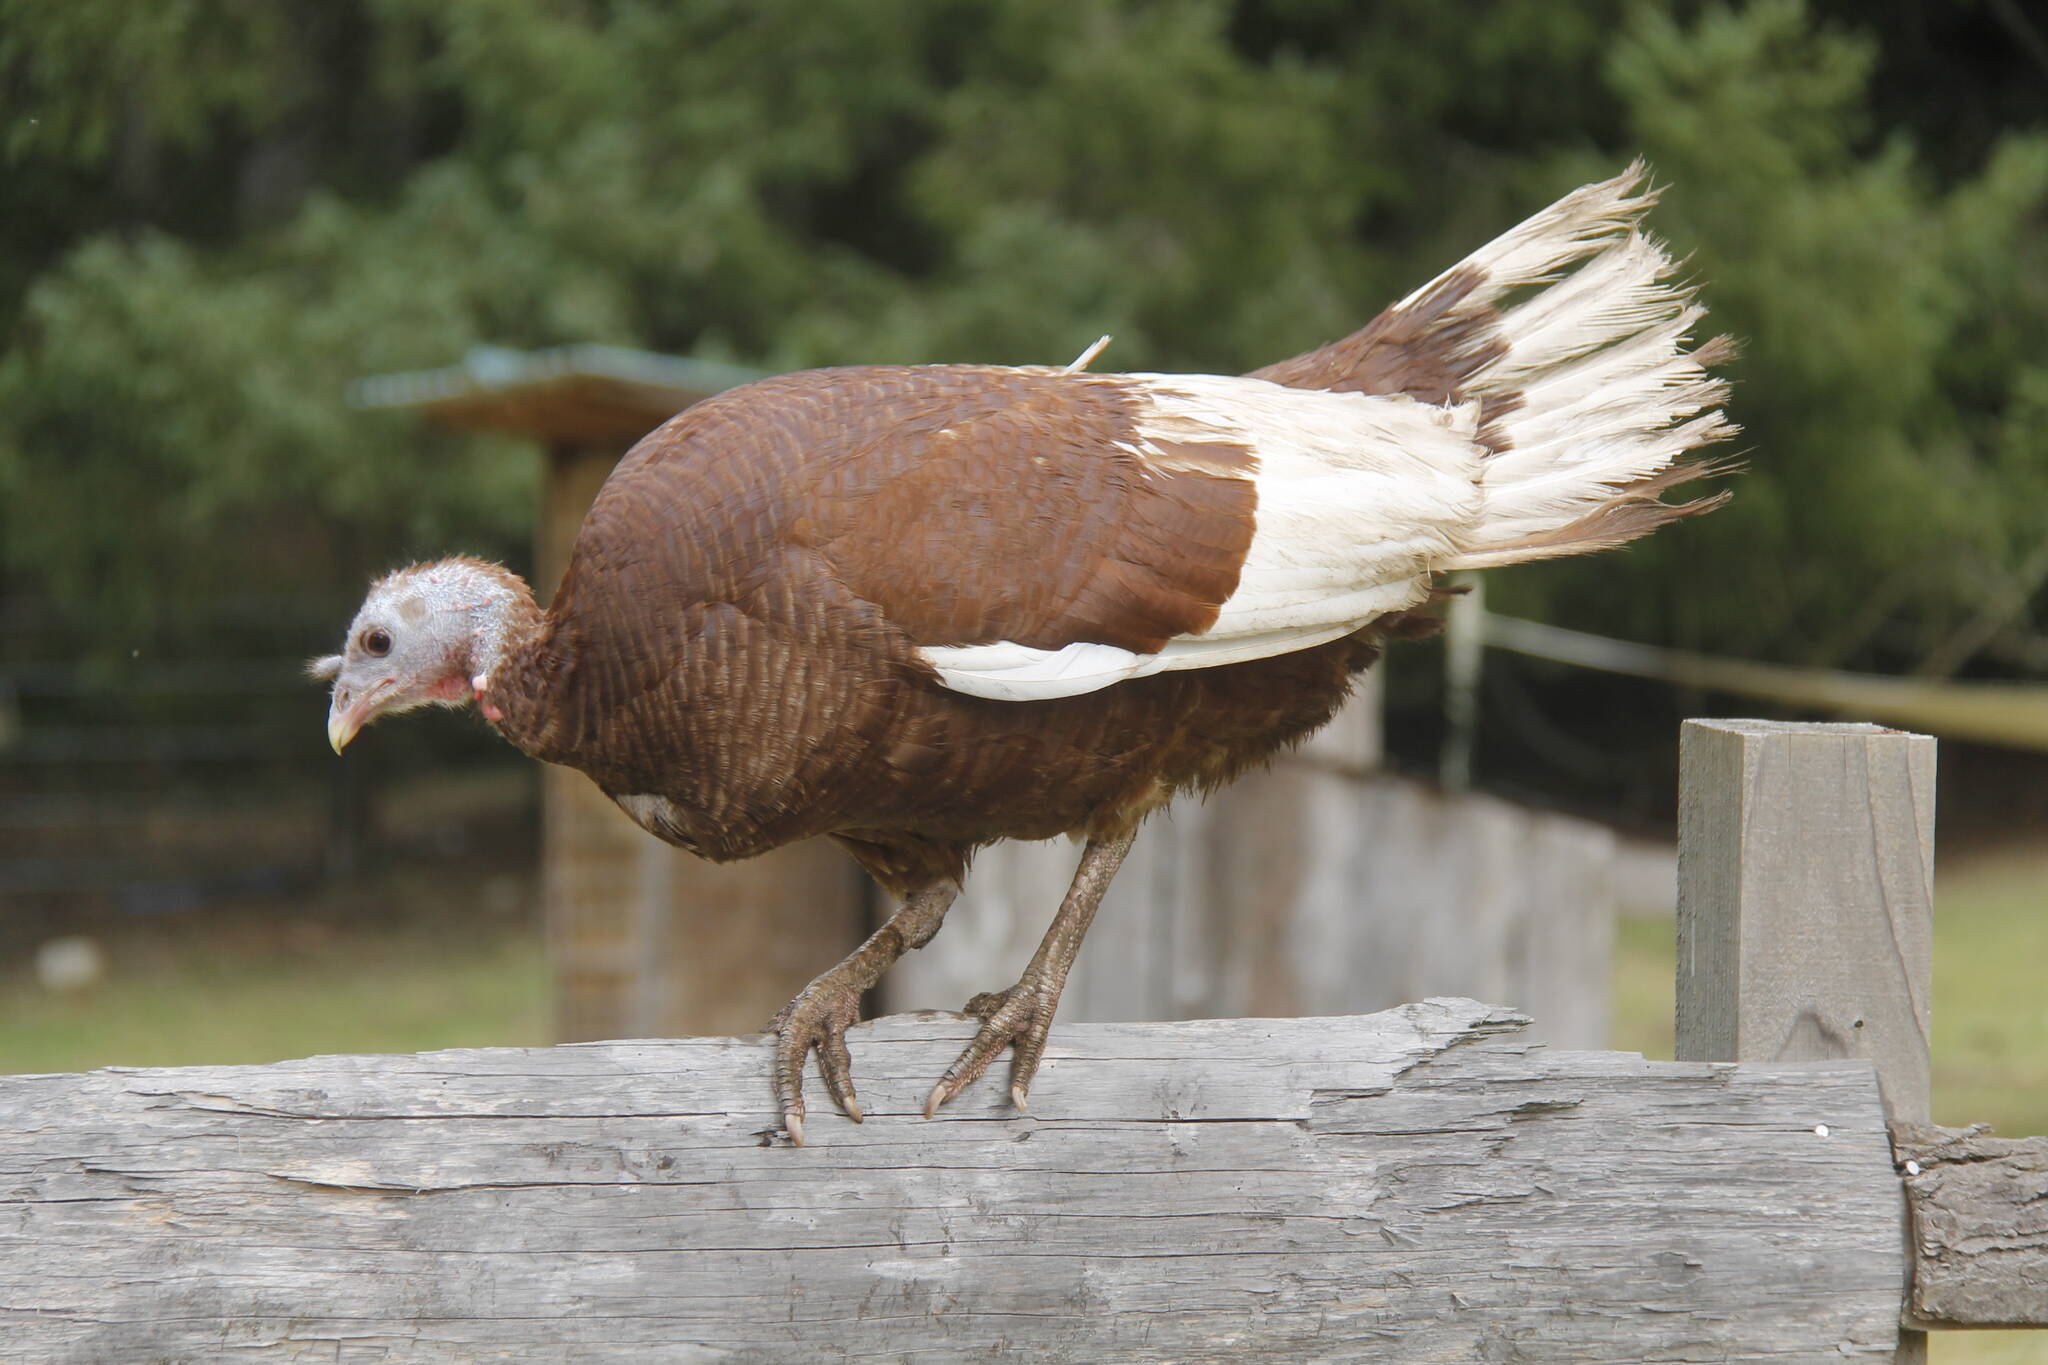 Lilac the turkey poses on the fence at Sweetwater Farm. (Photo by Kira Erickson/South Whidbey Record)